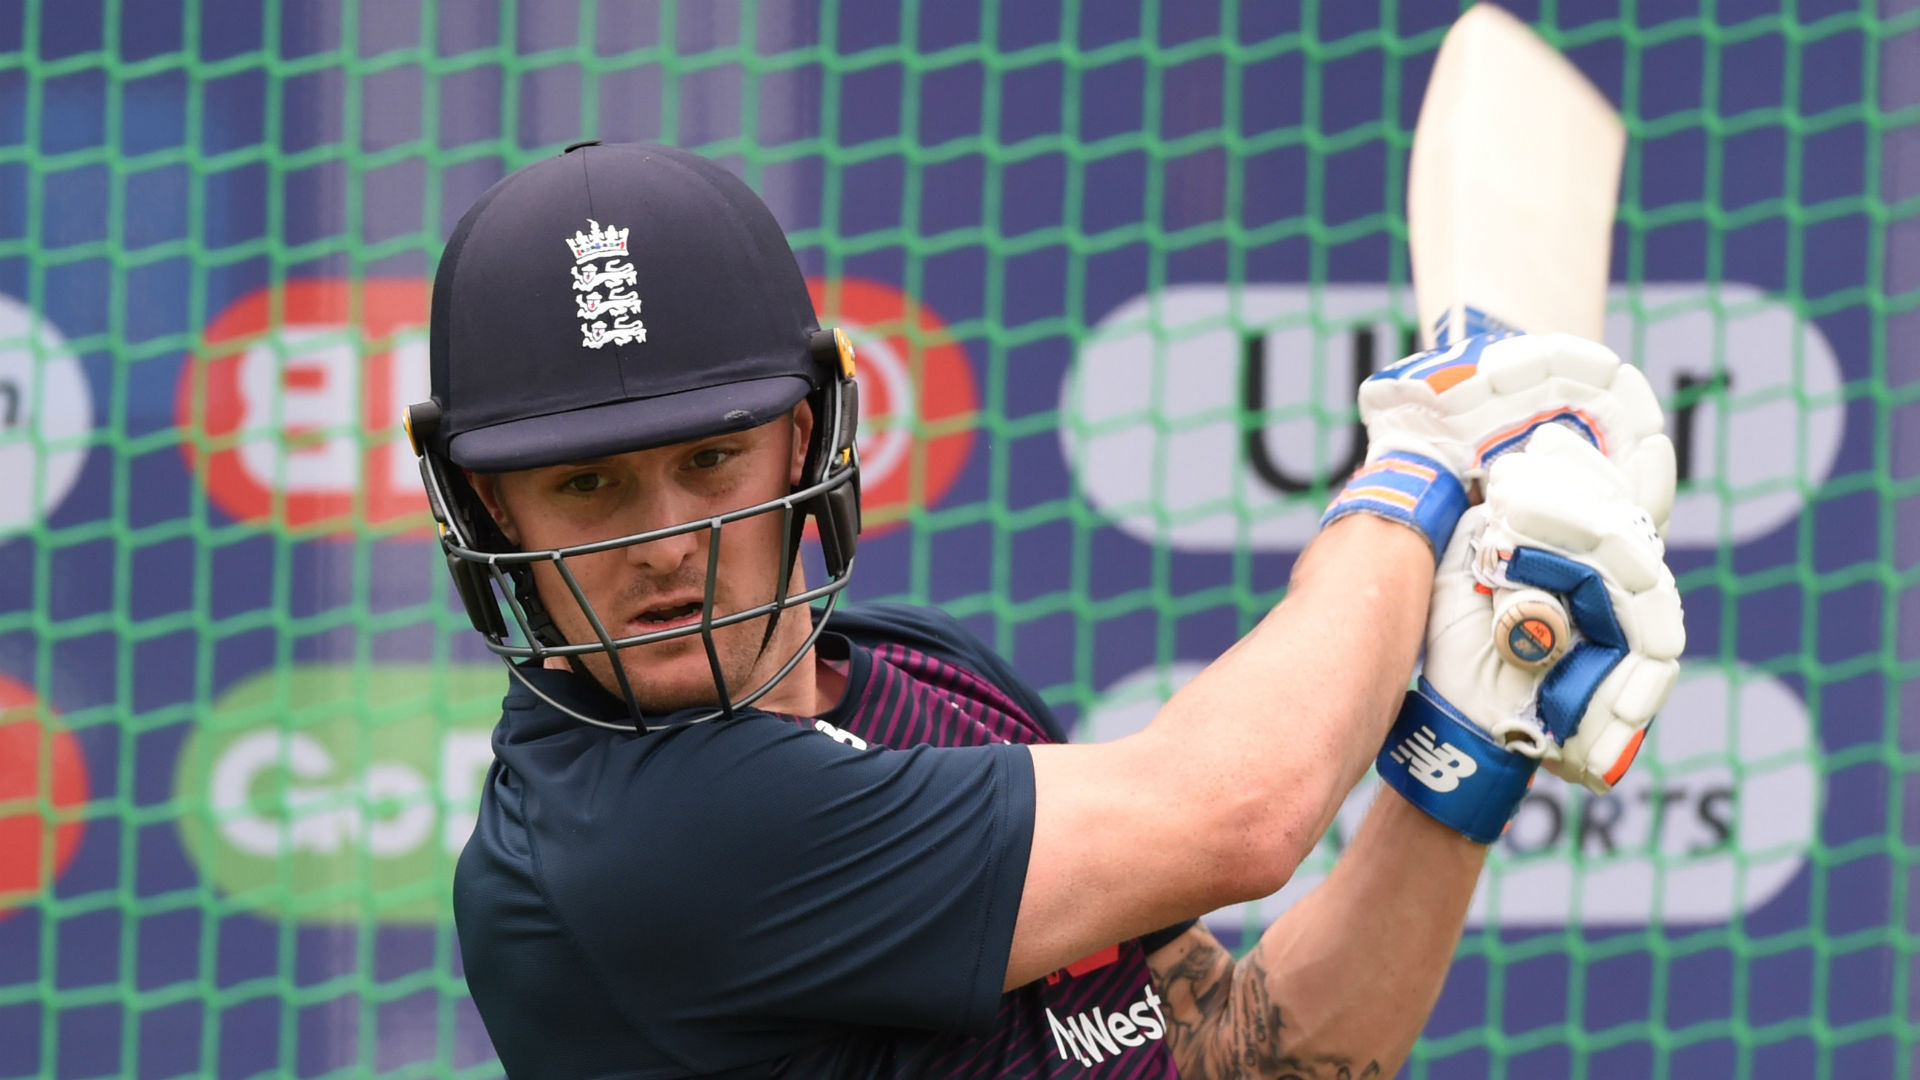 England have lost two of the three games in Jason Roy's absence, but Eoin Morgan revealed he hopes to return against India on Sunday.